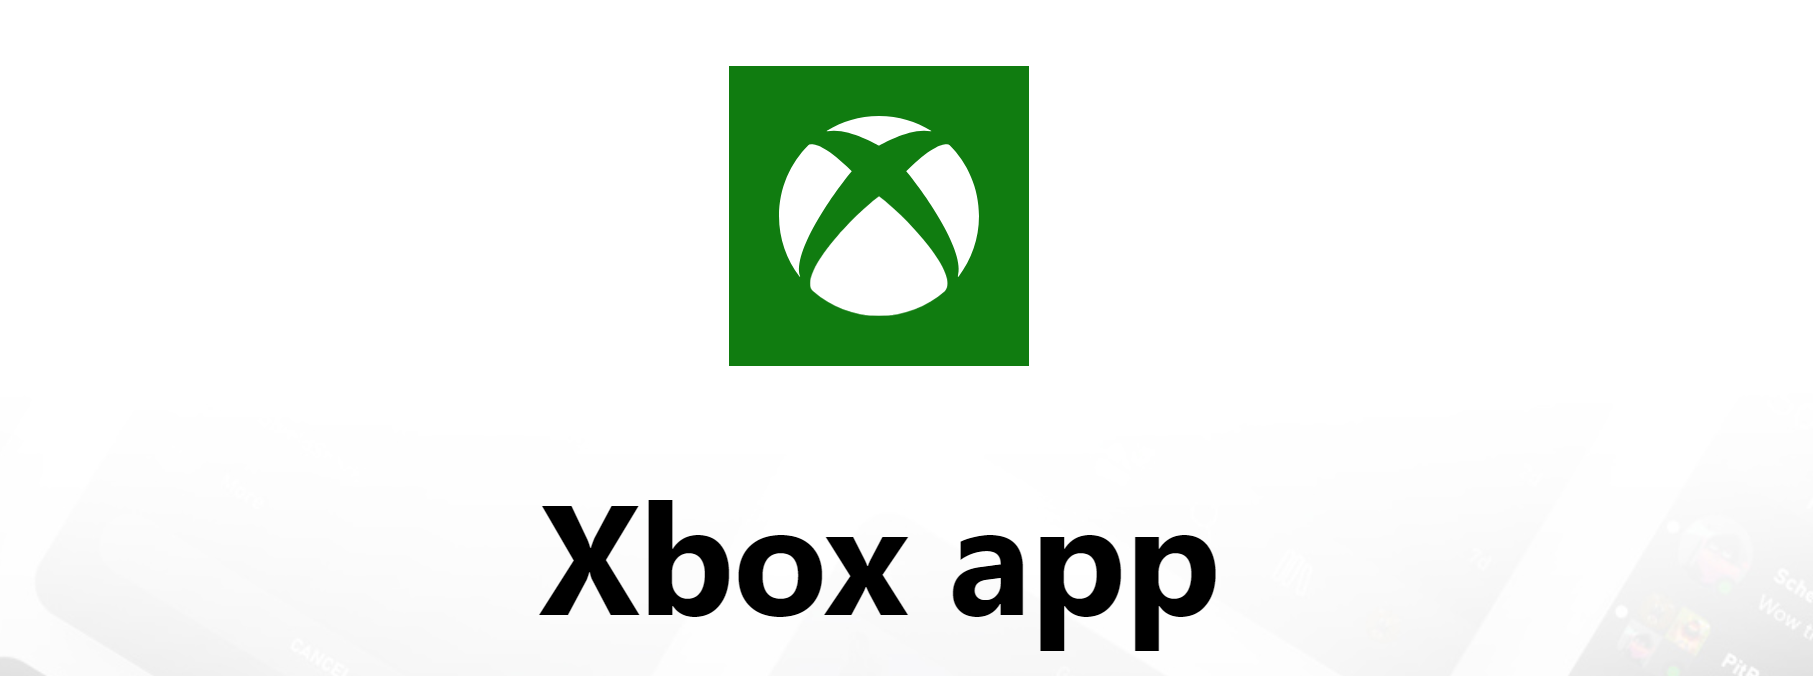 XBOX-APP.png